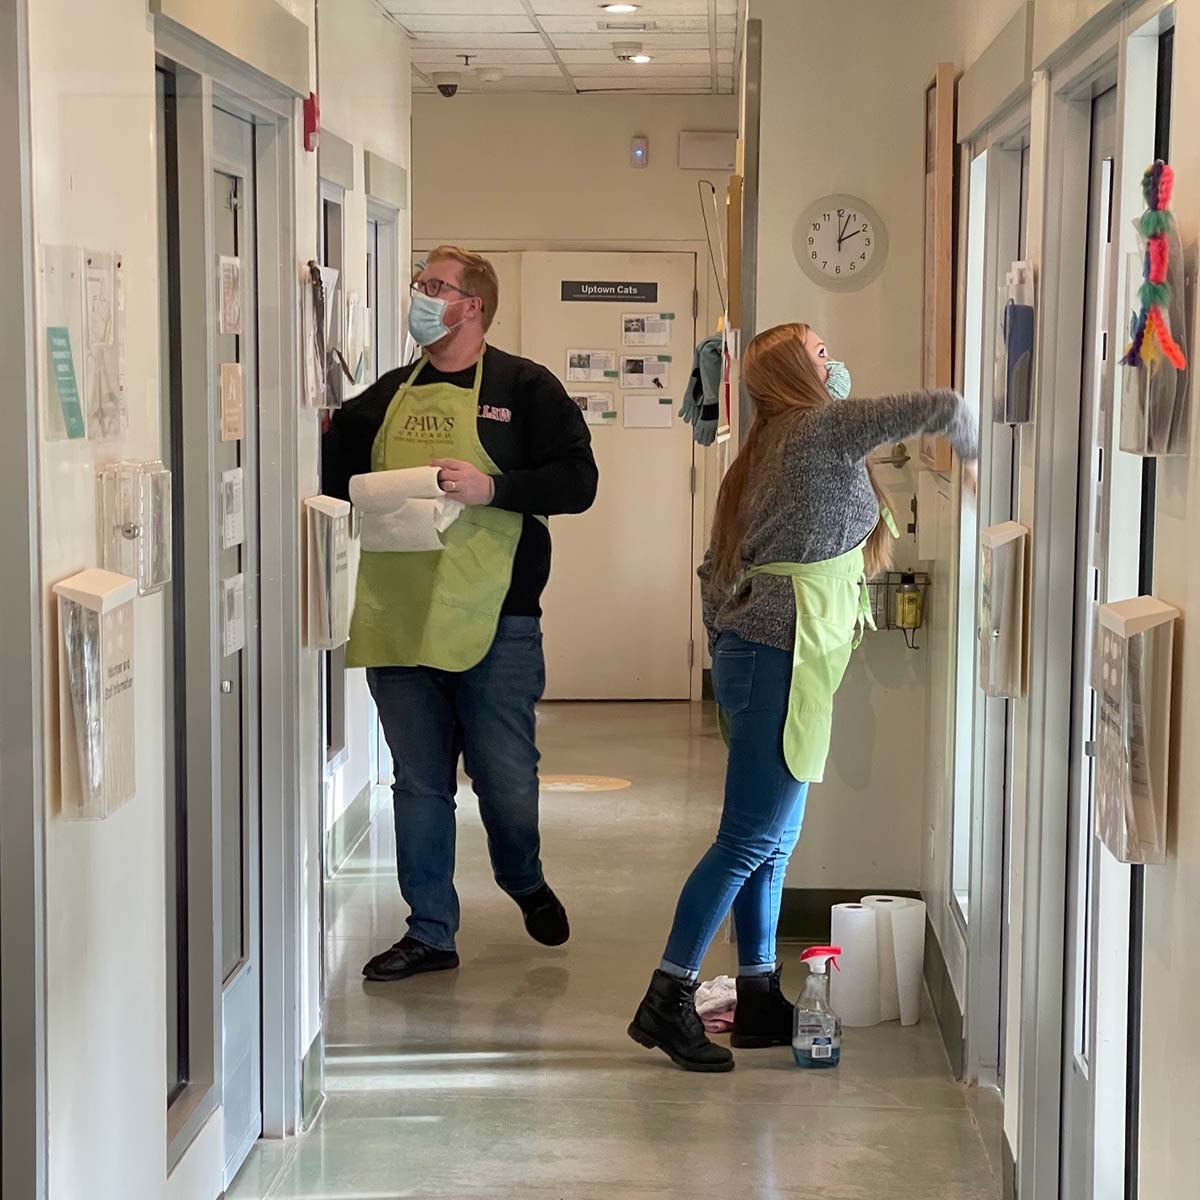 Will Turner and Jessica Hucek, wearing light green PAWS aprons, clean walls and windows in a hallway at the animal shelter